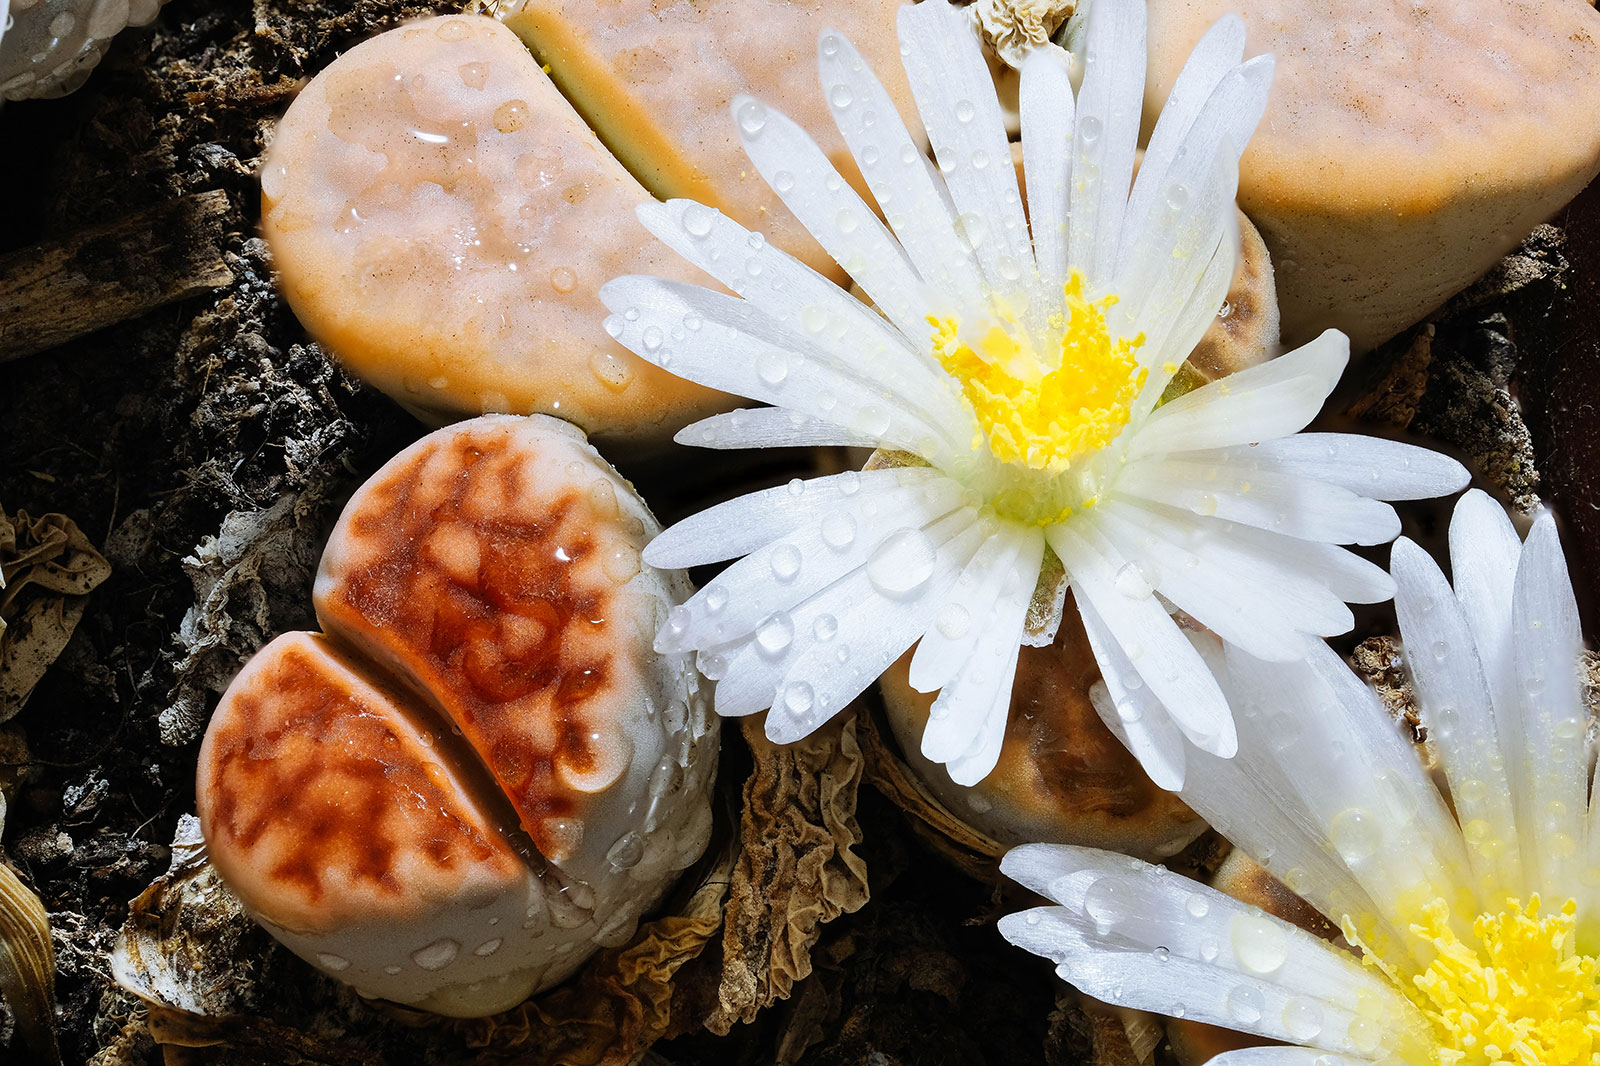 Lithops (living stones) with white daisy-like flowers